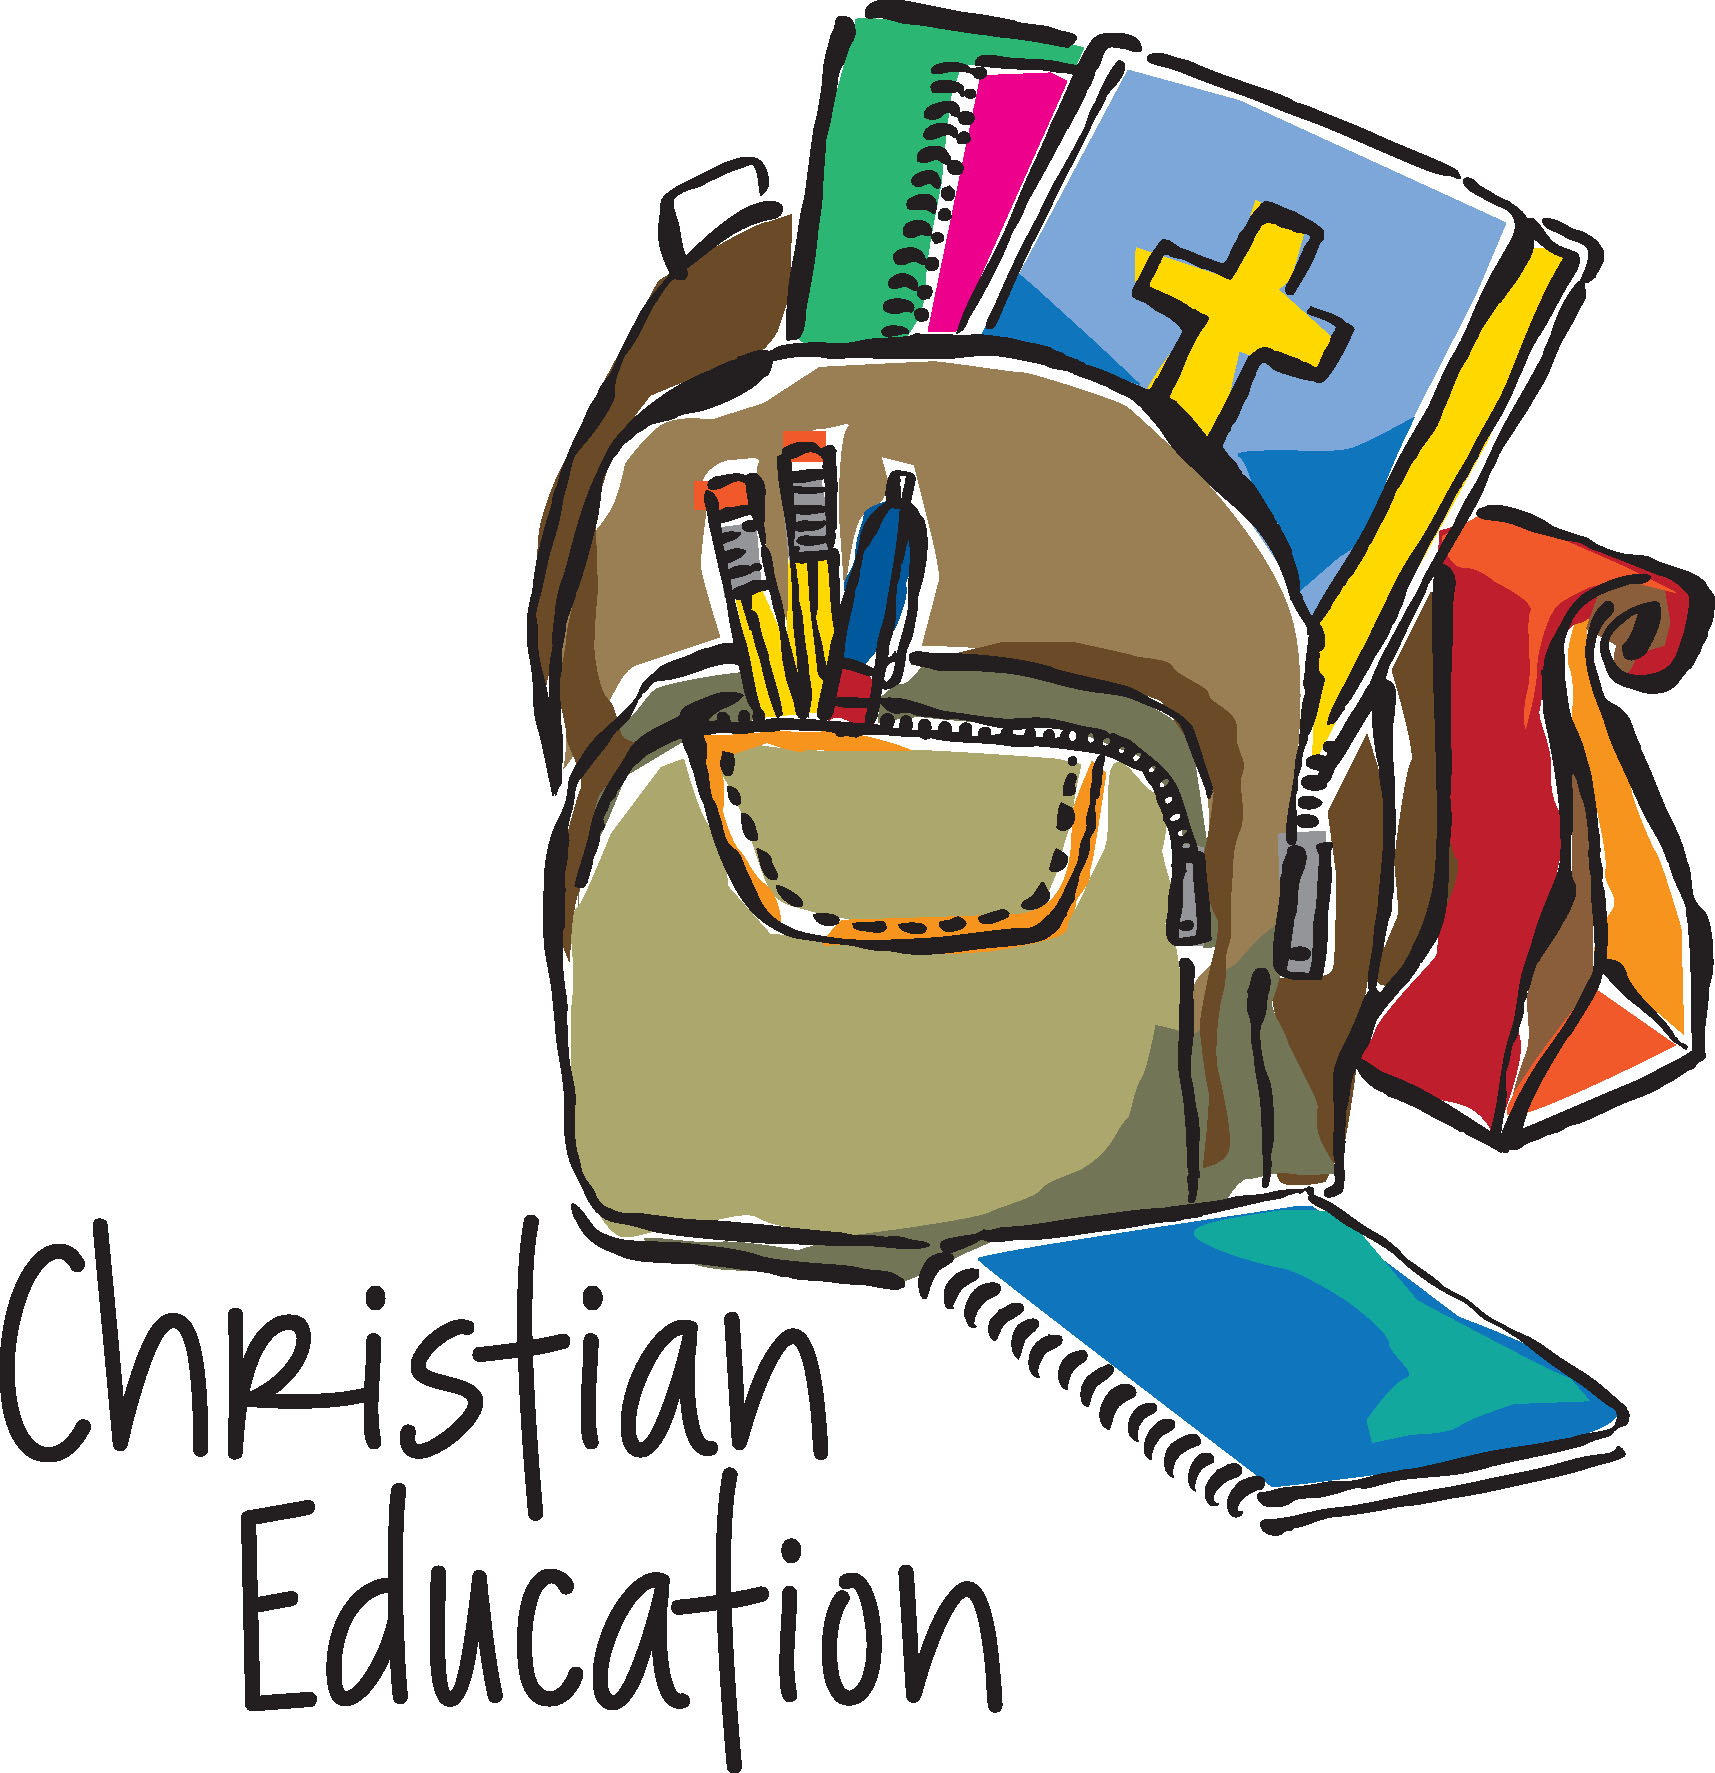 clipart pictures on education - photo #43